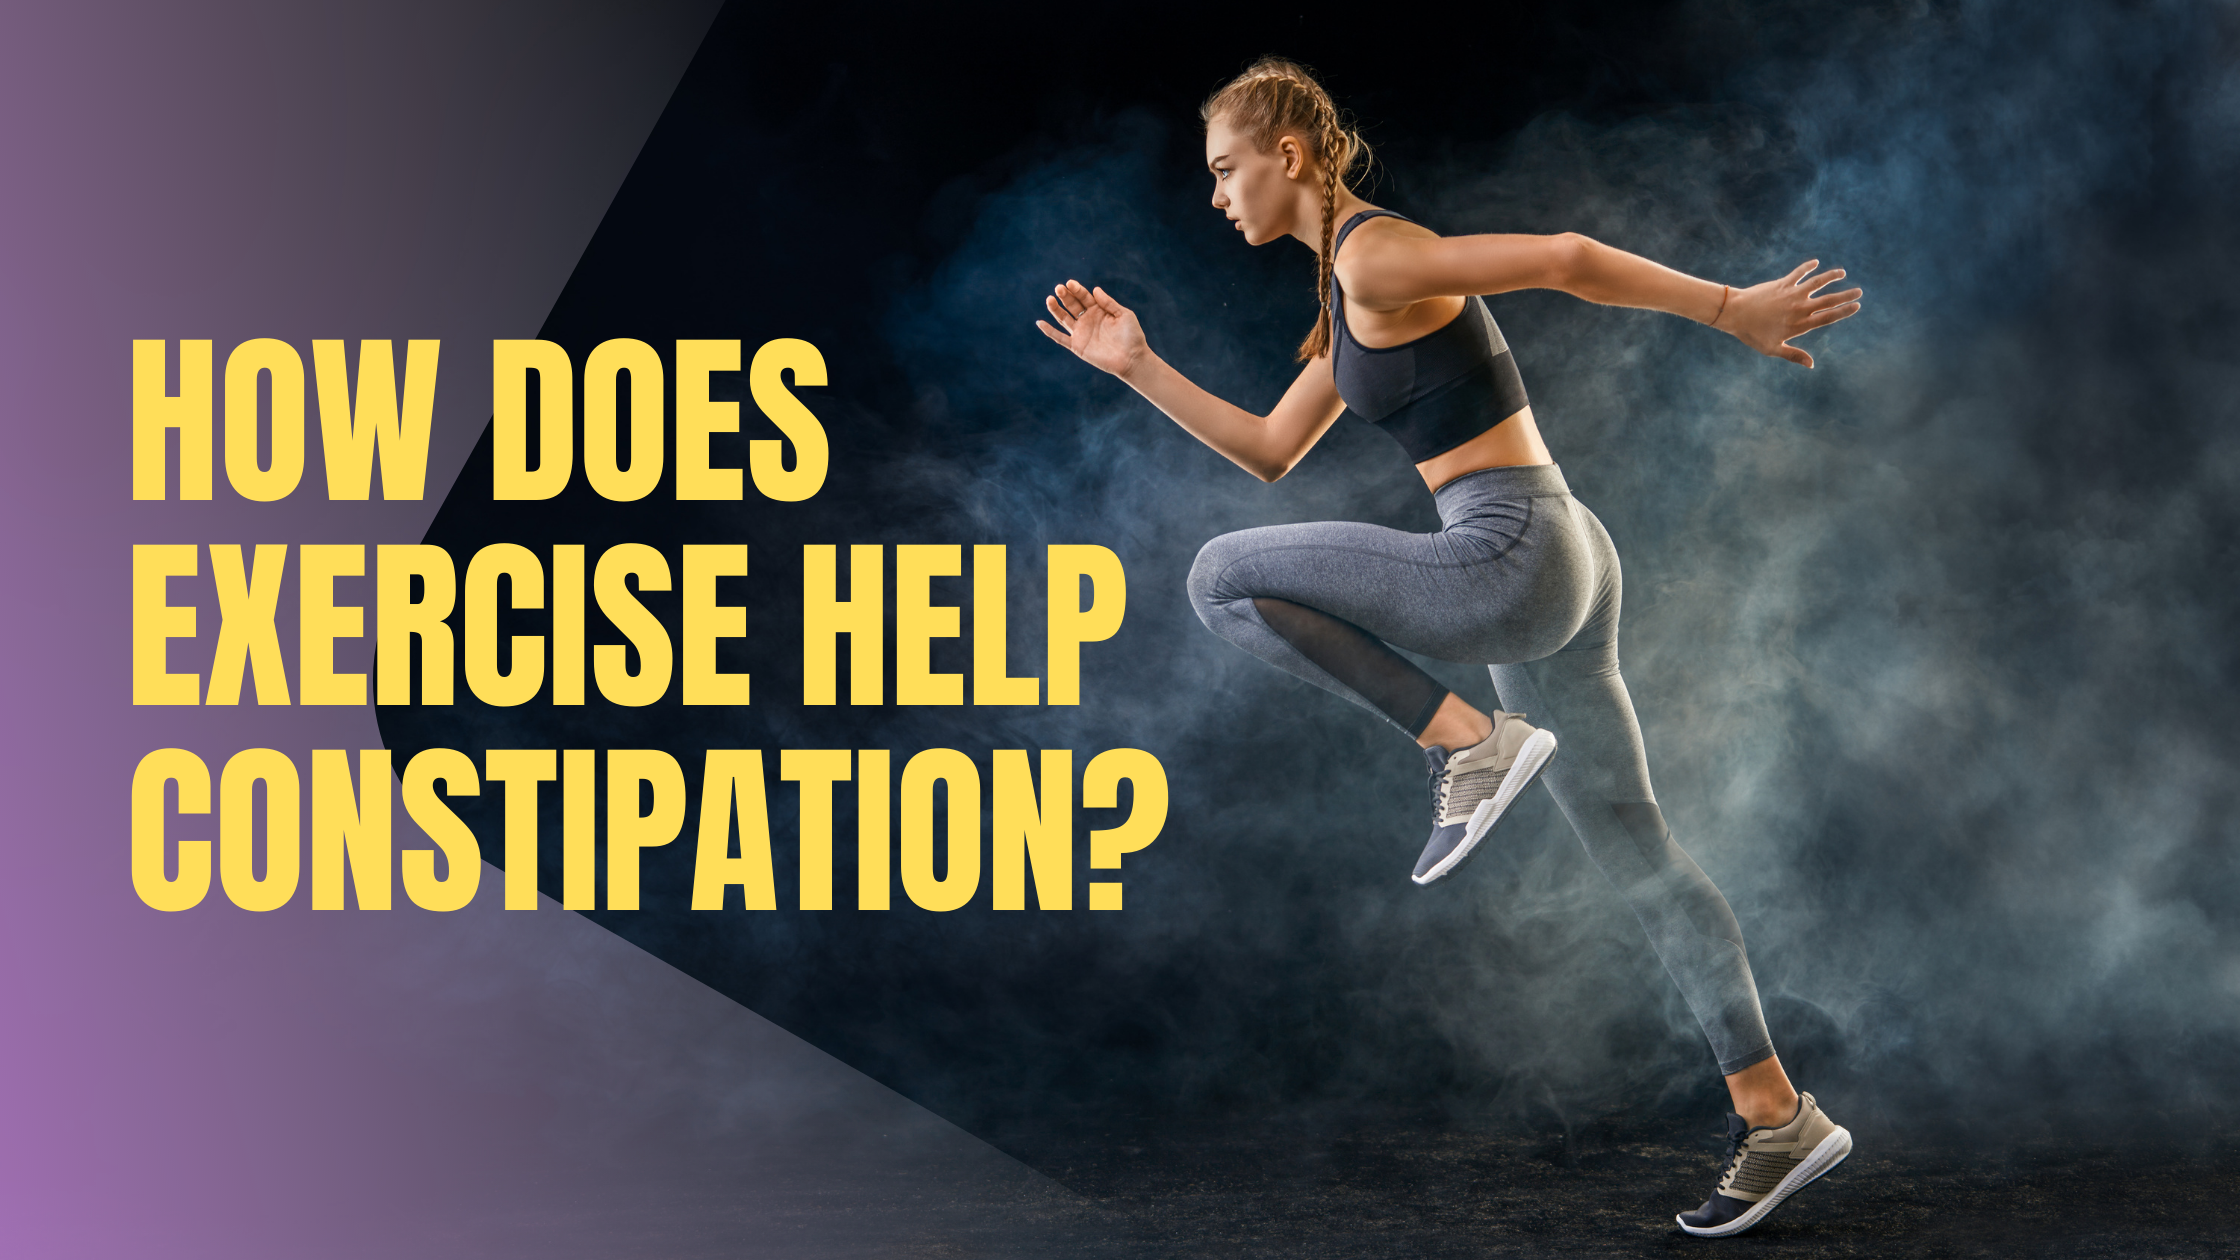 How Does Exercise Help Constipation?